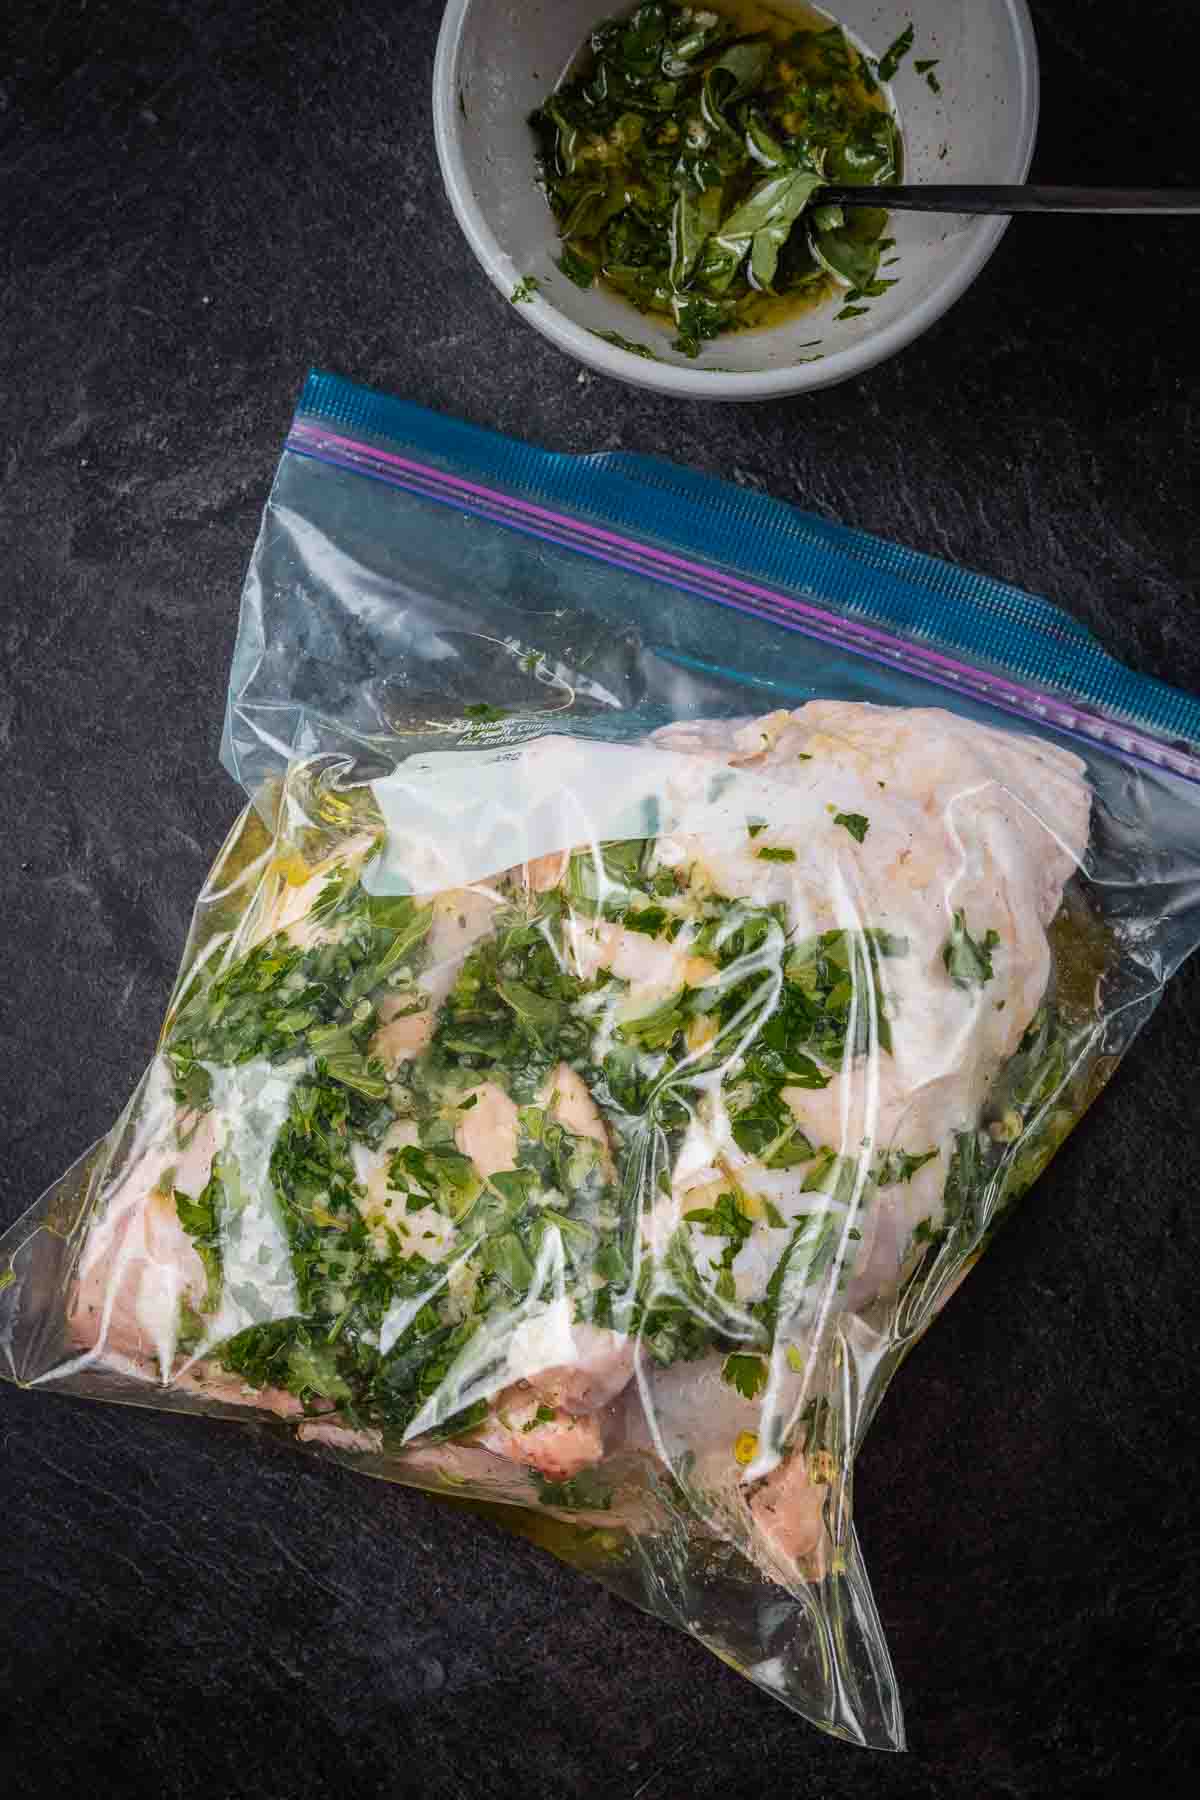 Chicken legs in a resealable bag marinating.